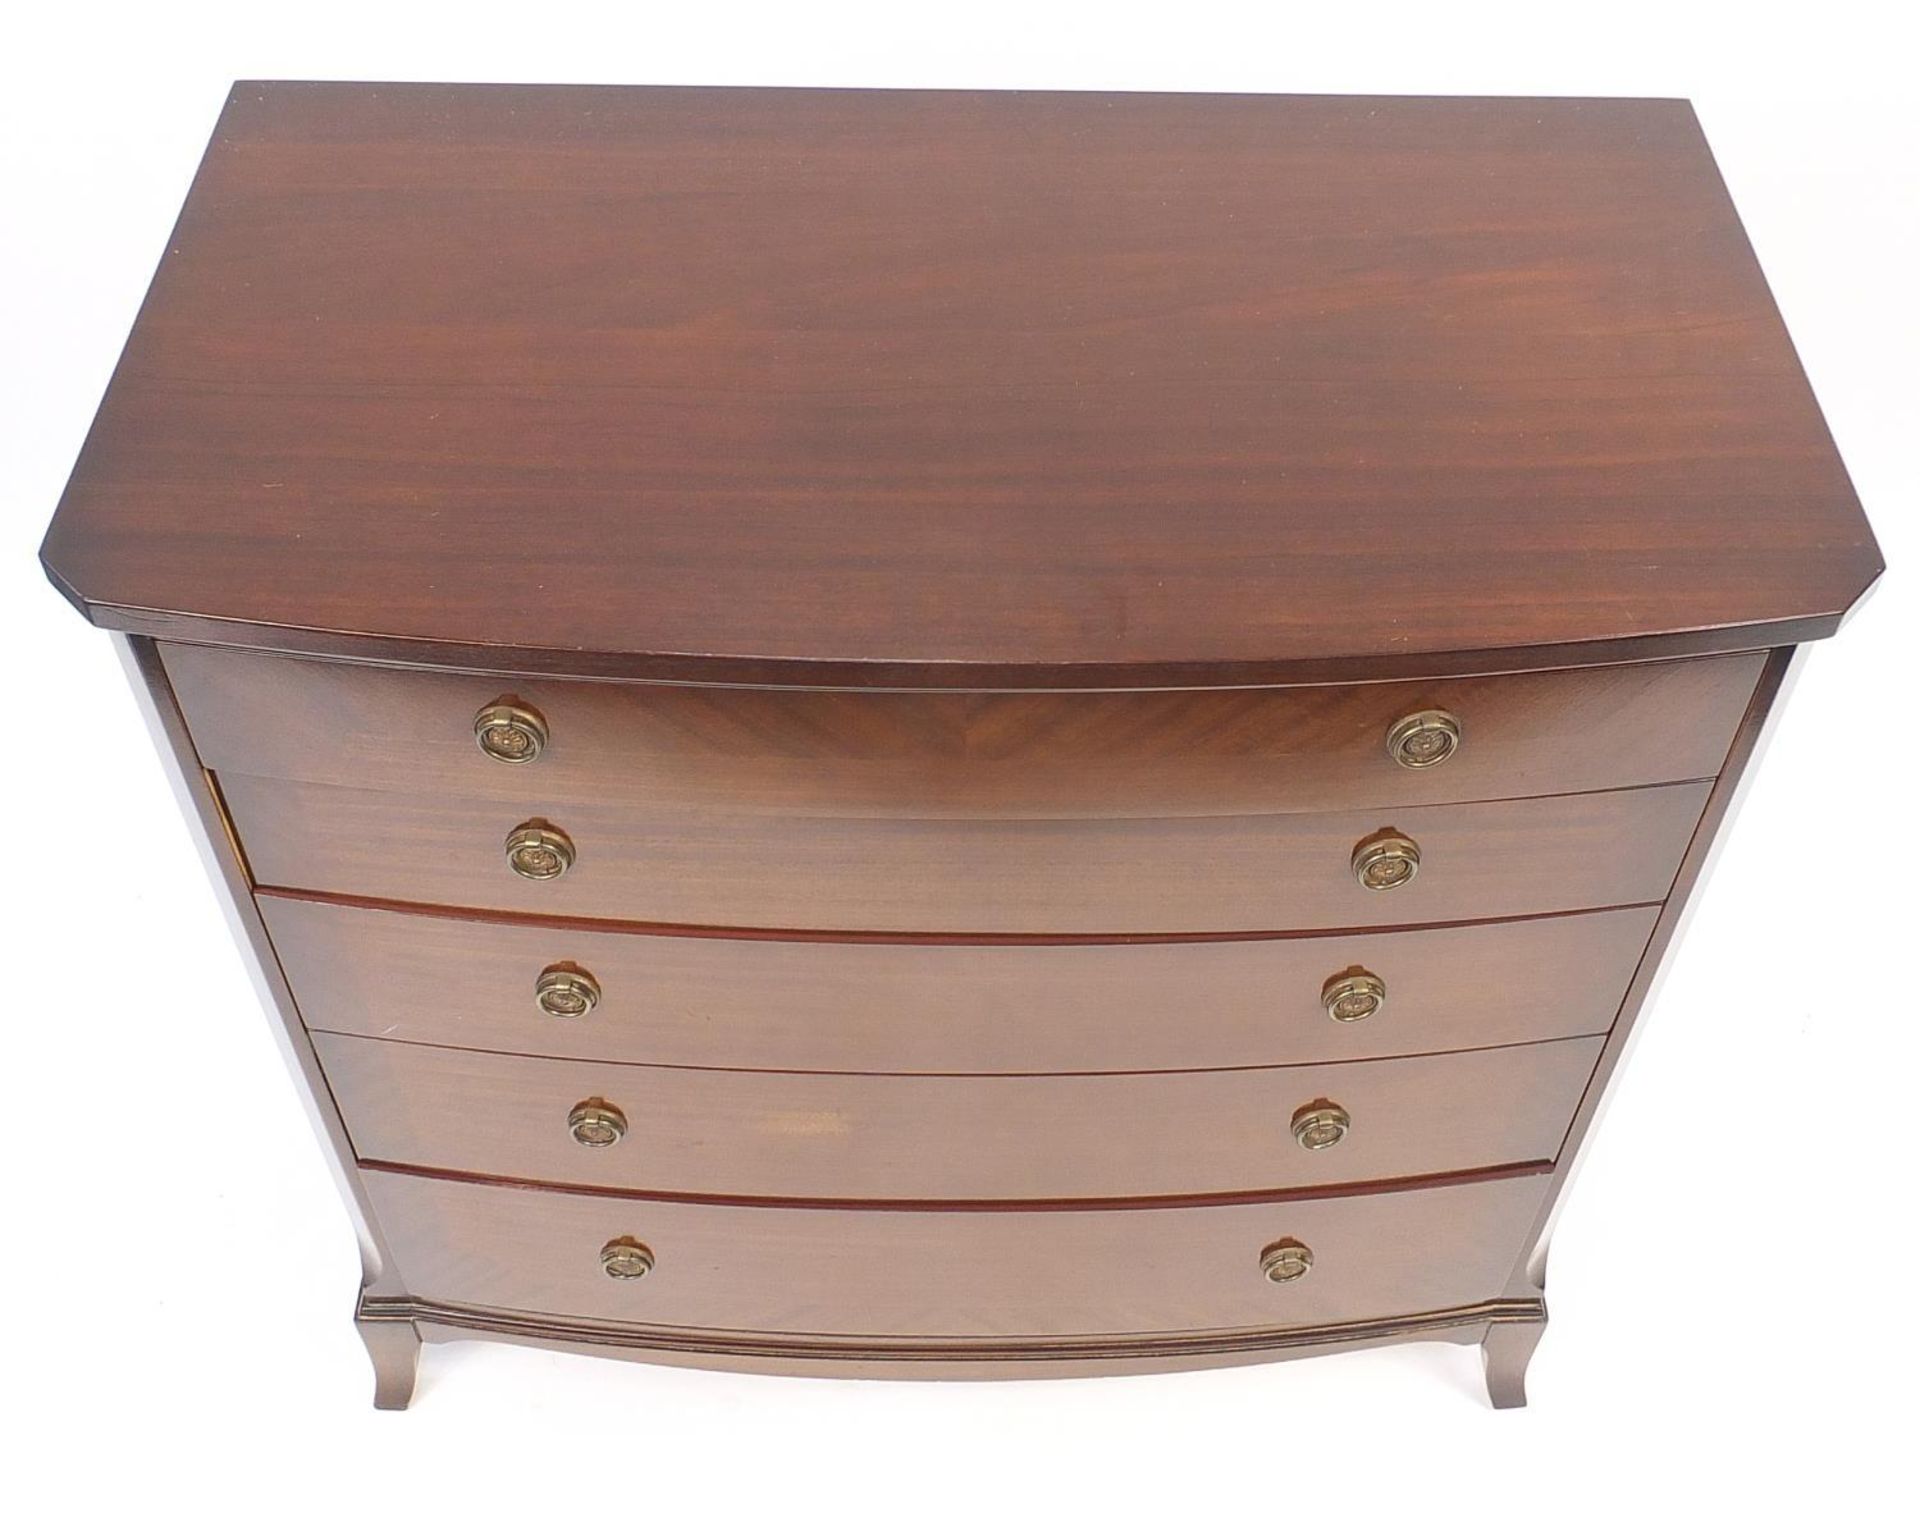 Strongbow mahogany bow fronted chest of drawers with ring handles, 93cm H x 91cm W x 48cm D - Image 3 of 4